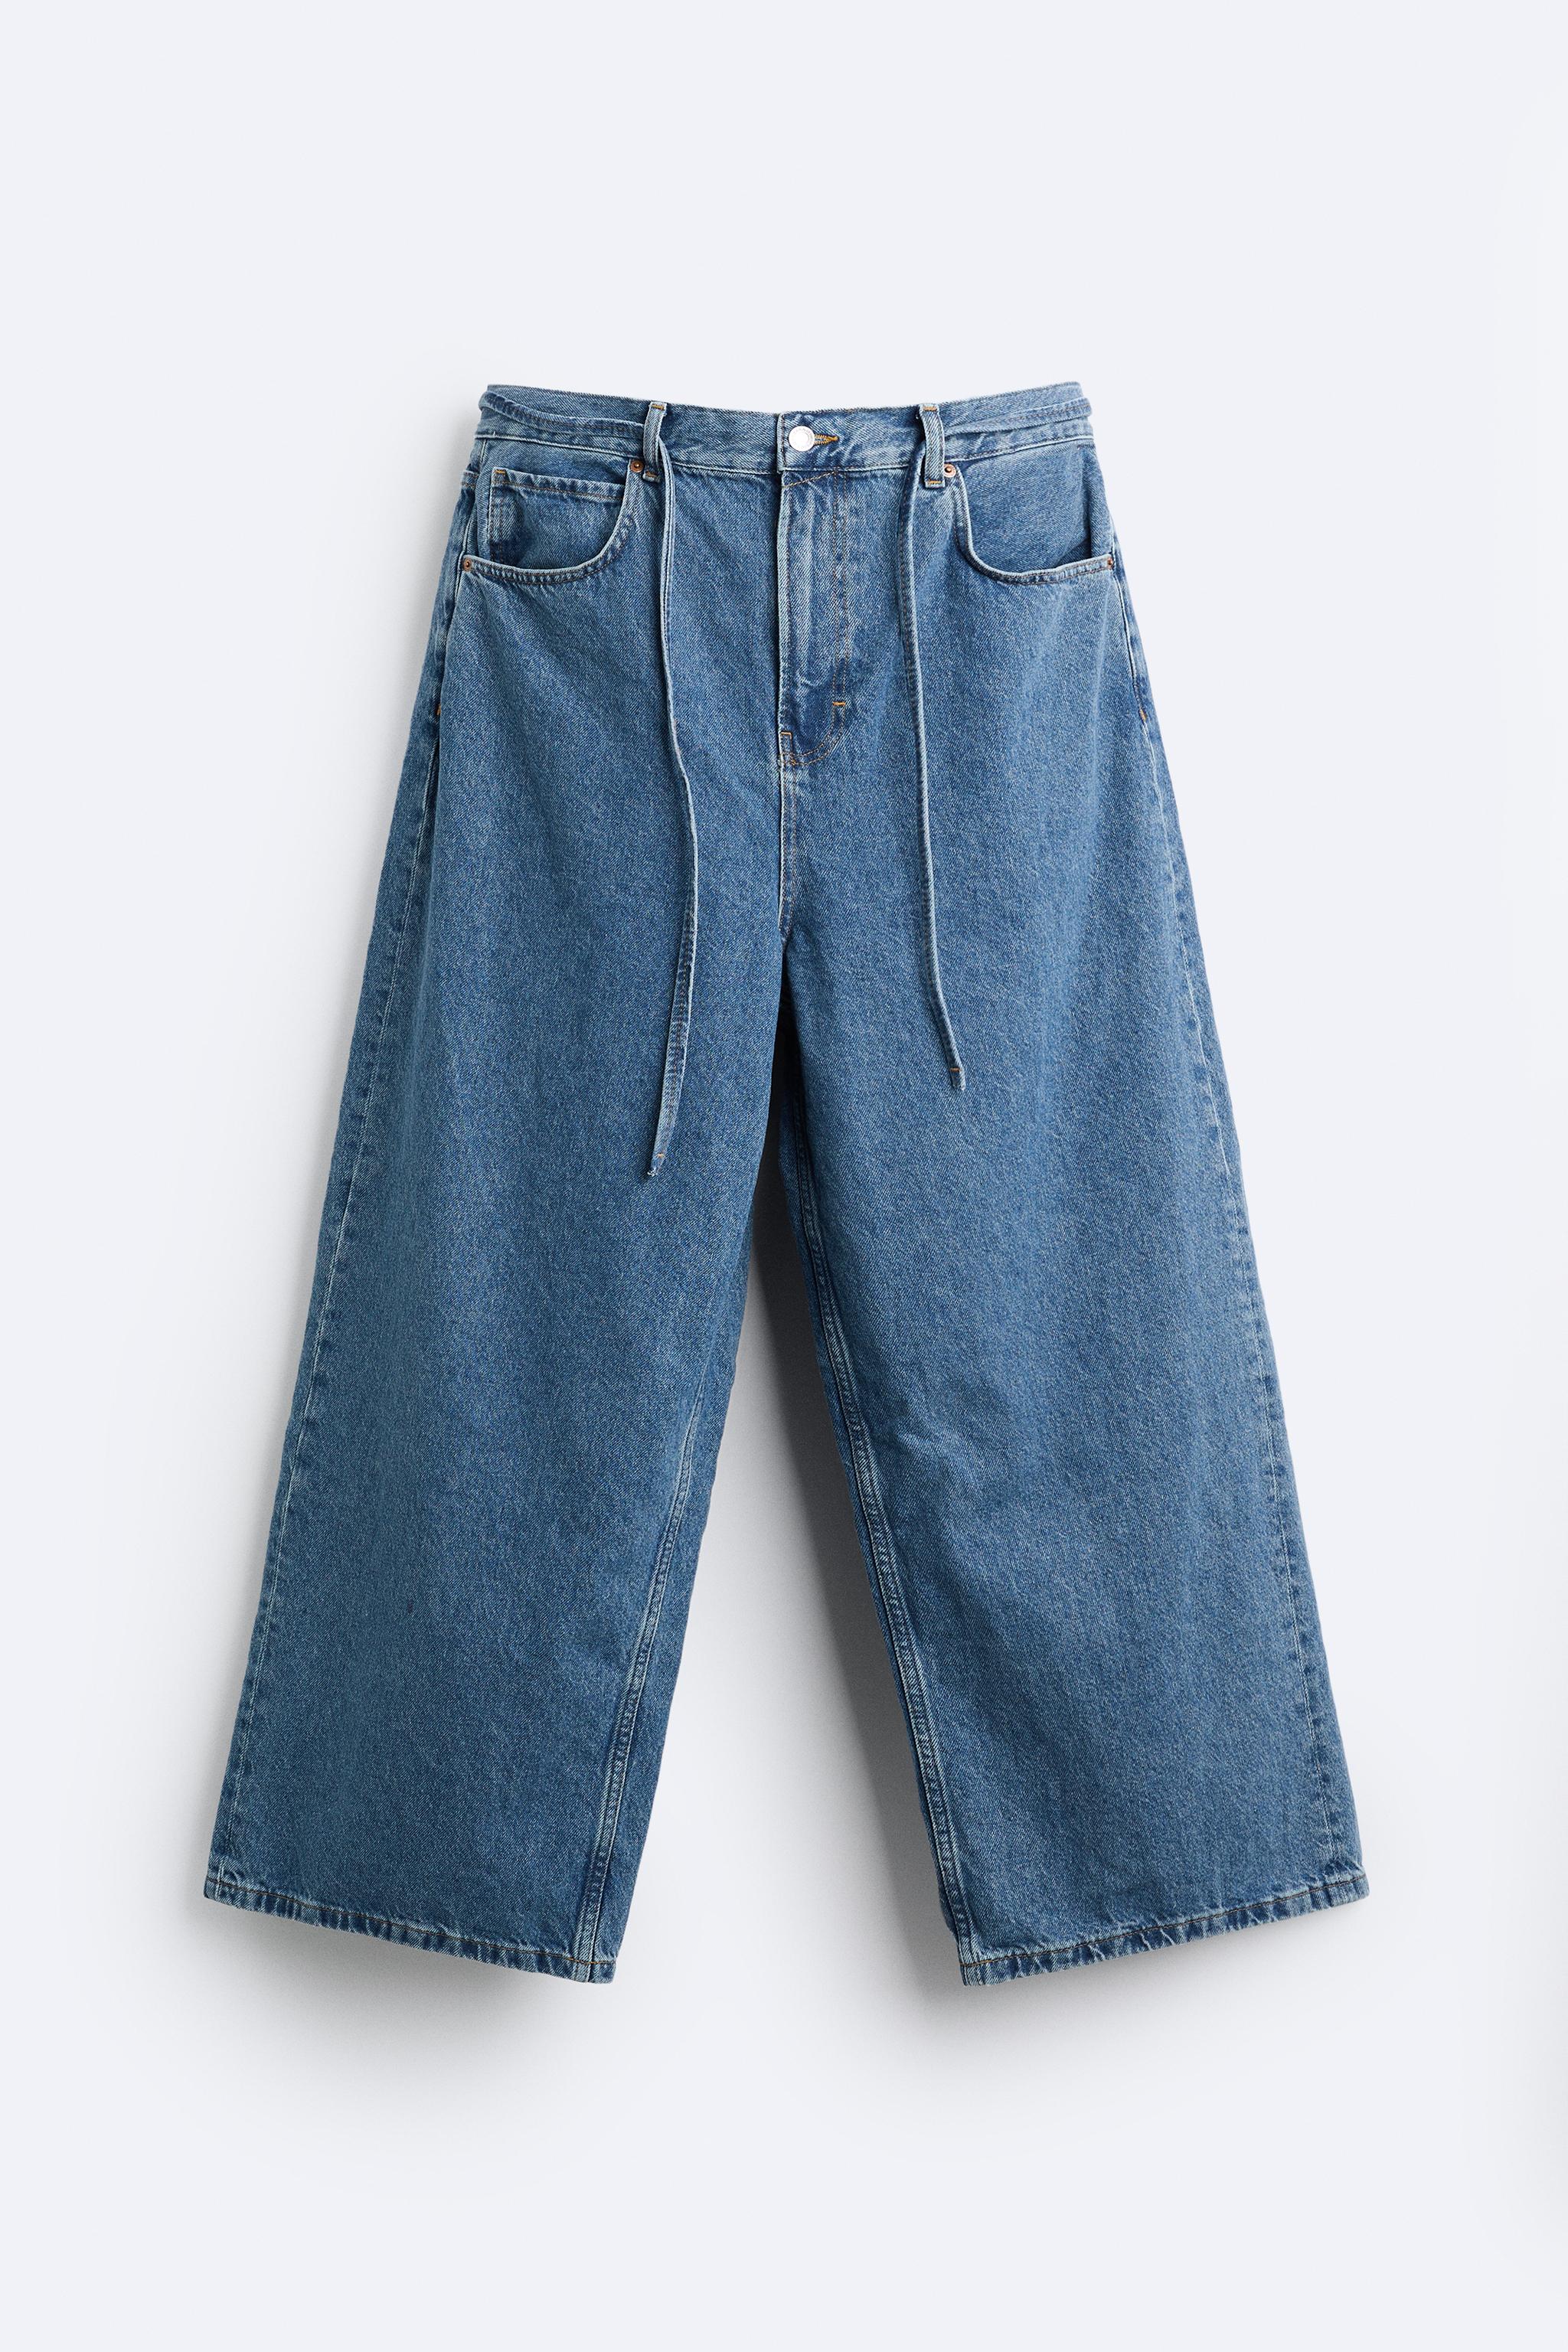 BAGGY DRAWSTRING JEANS